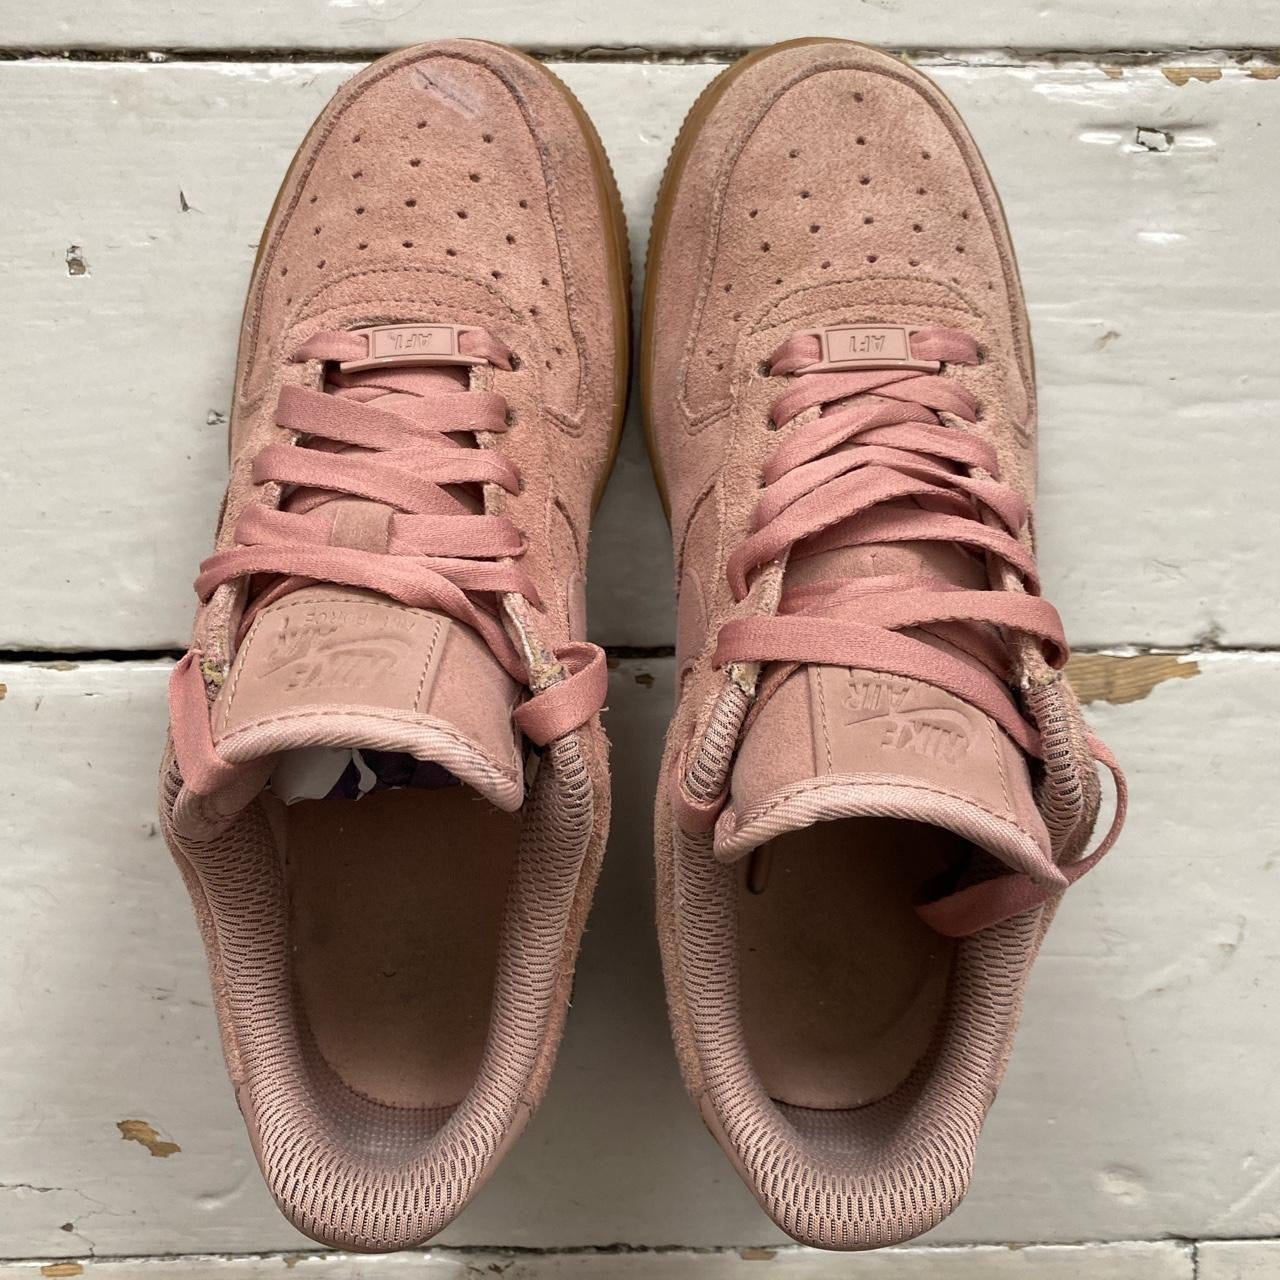 Nike Air Force 1 Suede Pink Gum Sole (UK 5)